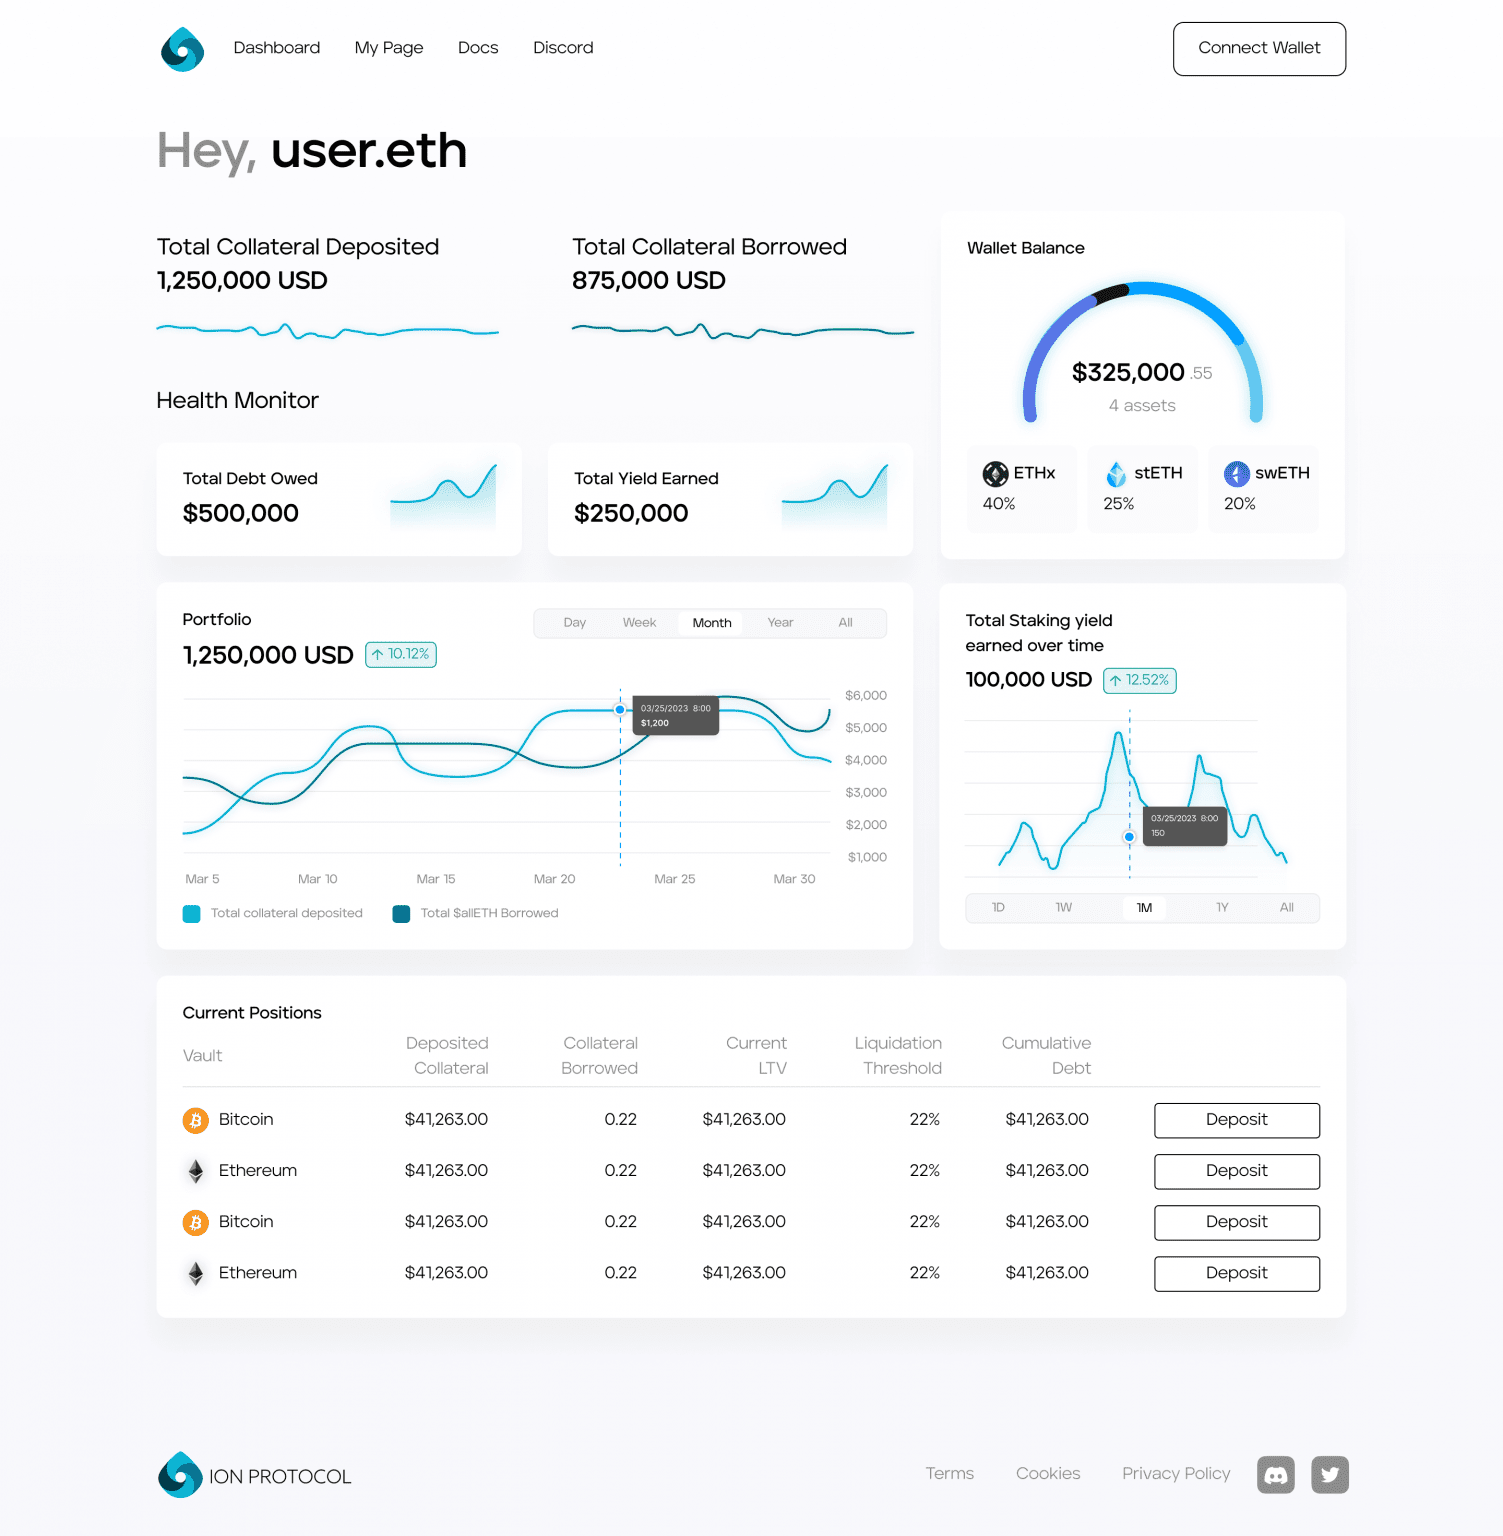 dashboard interface for a cryptocurrency platform named Ion Protocol with various charts and graphs with Total Collateral Deposit, Total Collateral Borrowed, Wallet Balance, an Health Monitor with Total Dept Owed and Total Yield Earned, Portfolio, Total Staking Yield earned over time, Current Positions, all personally for the user